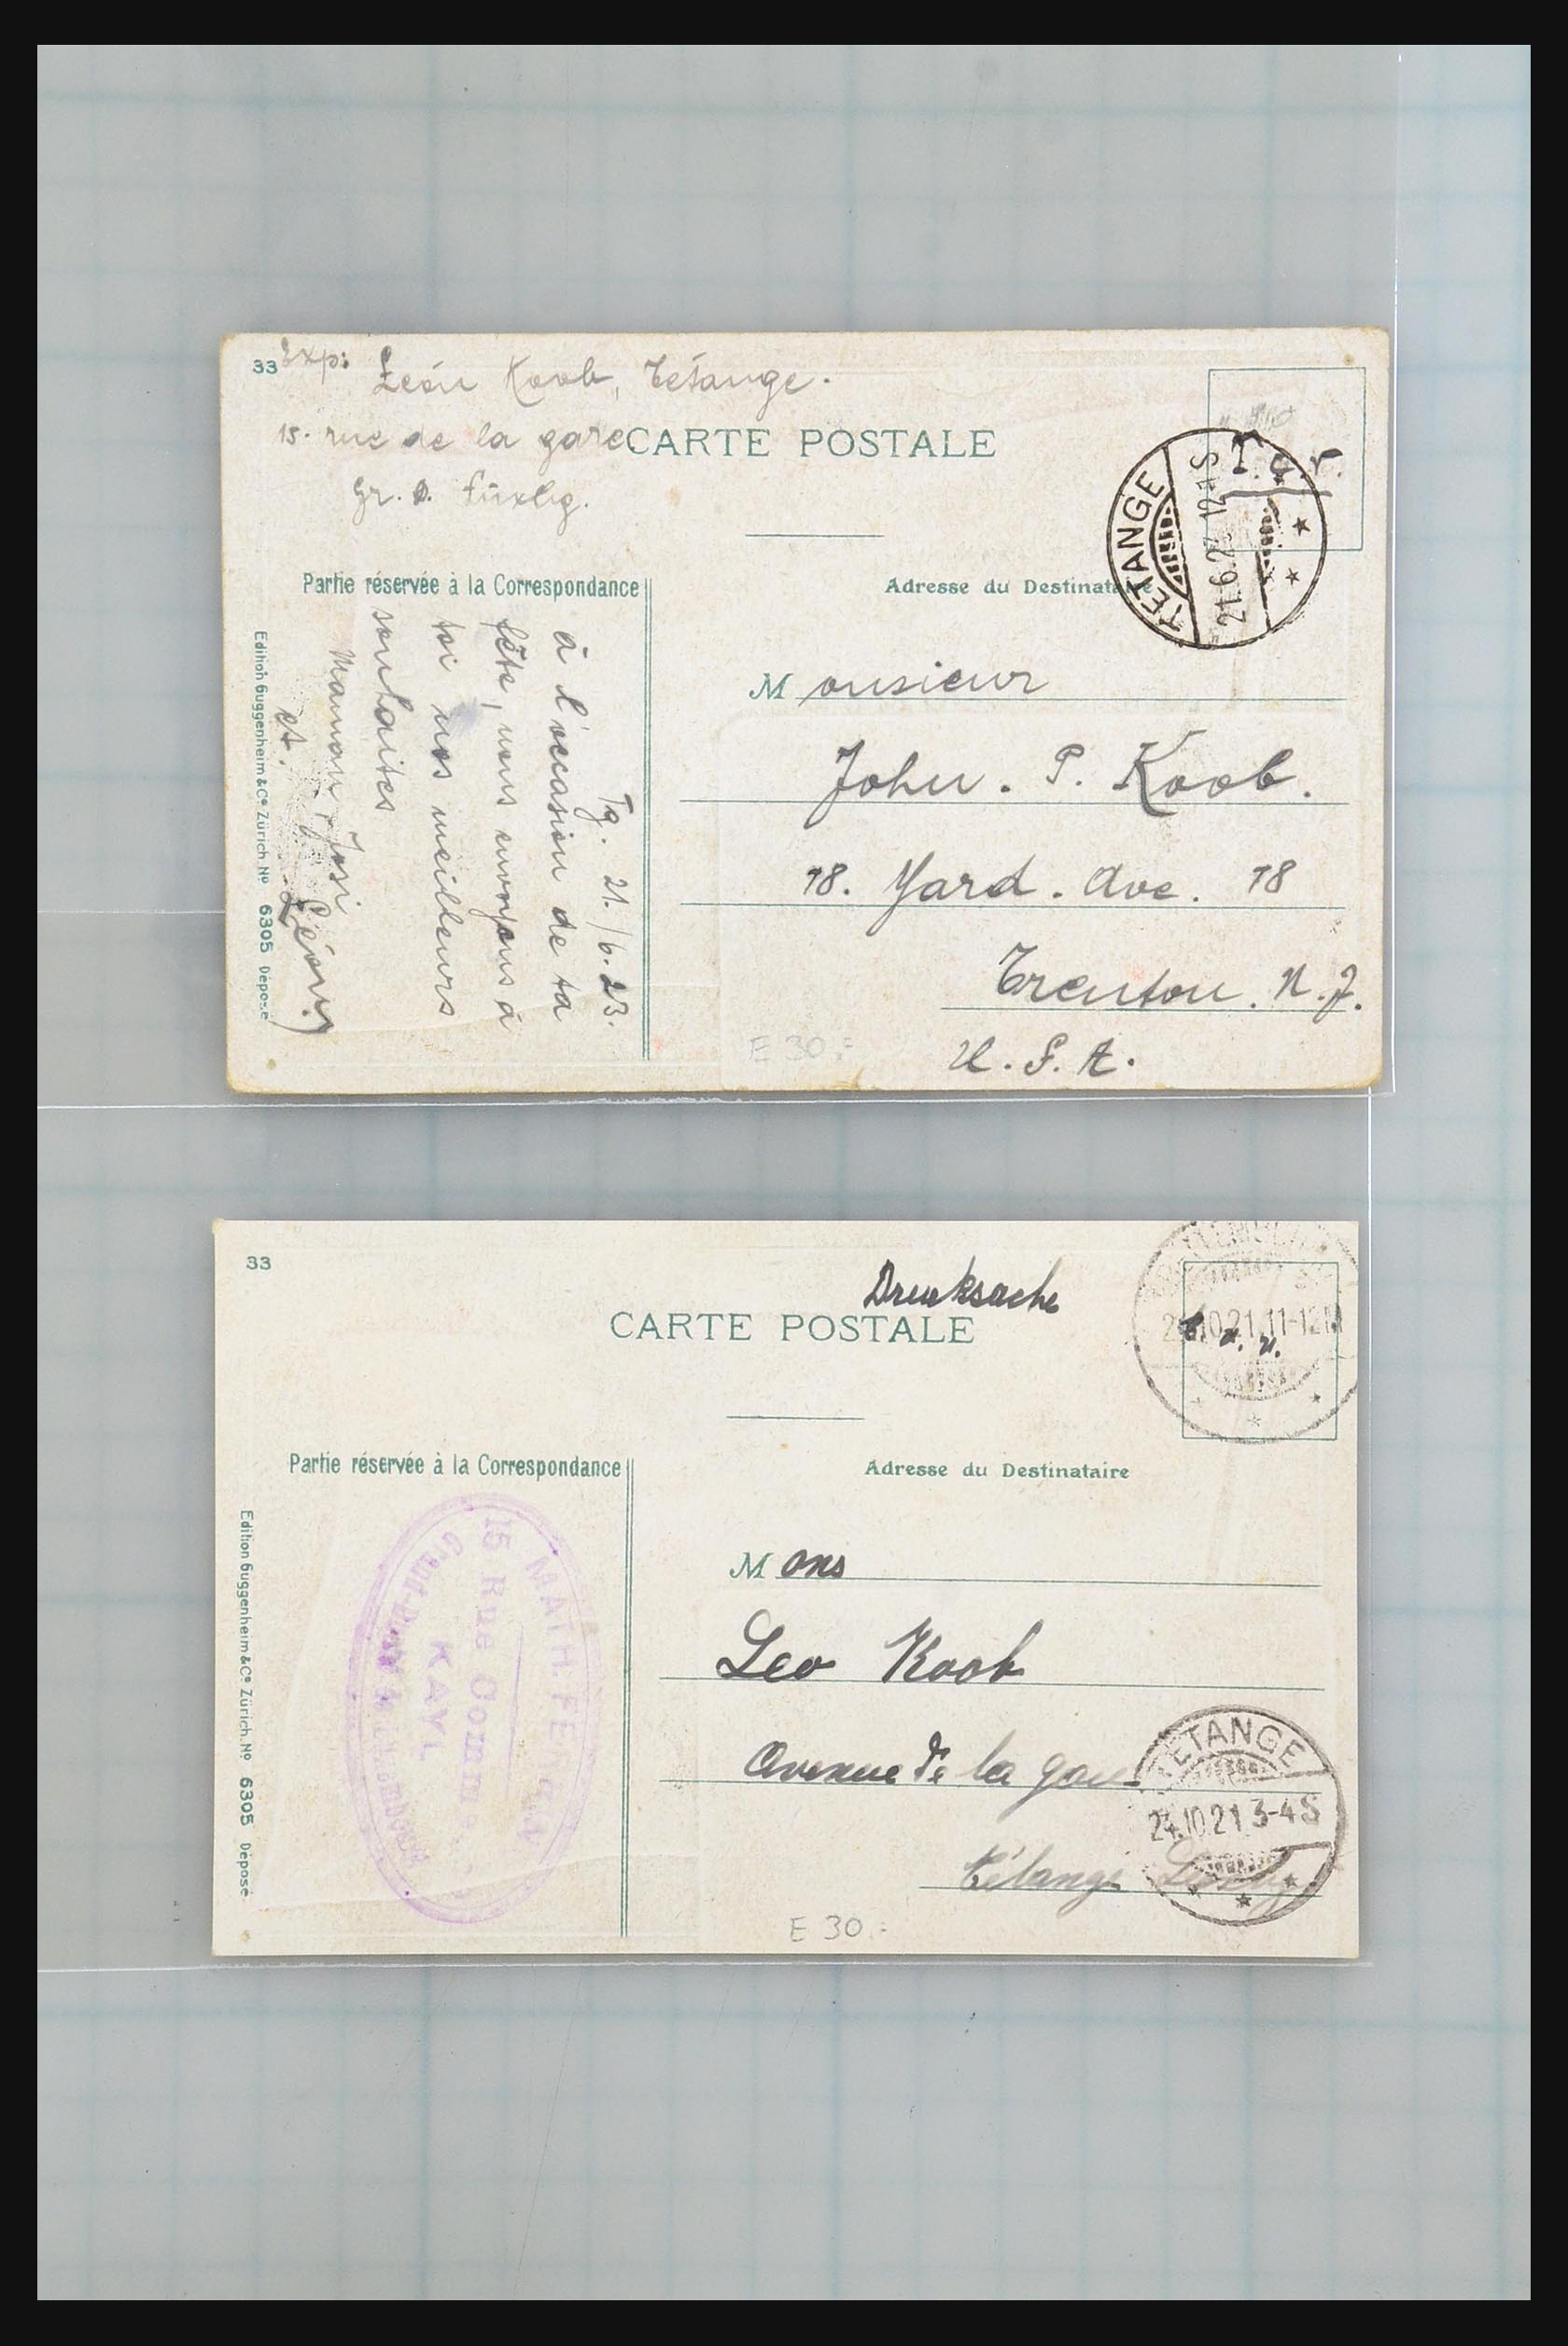 31358 023 - 31358 Portugal/Luxemburg/Greece covers 1880-1960.